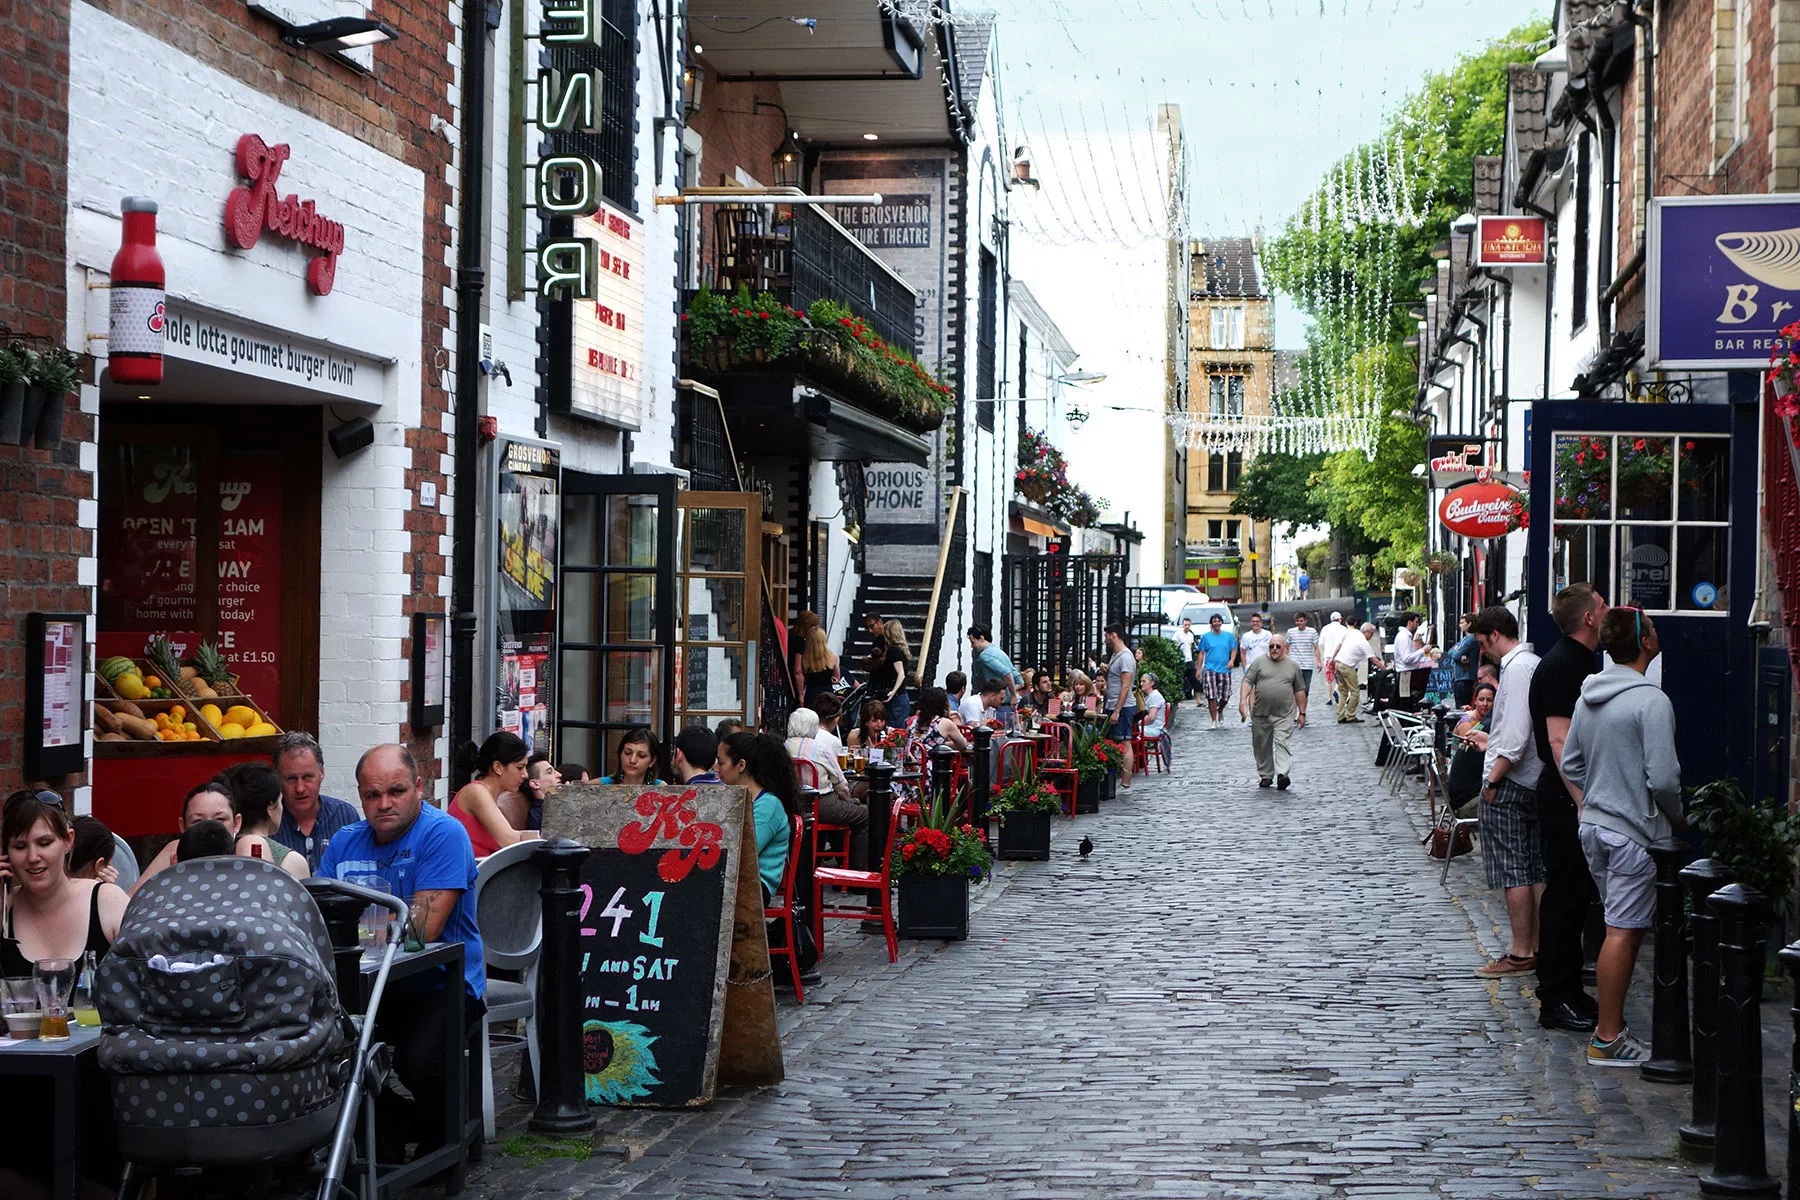 Ashton Lane is lined with an array of restaurants and bars, most with tables out front and convivial gardens in the back